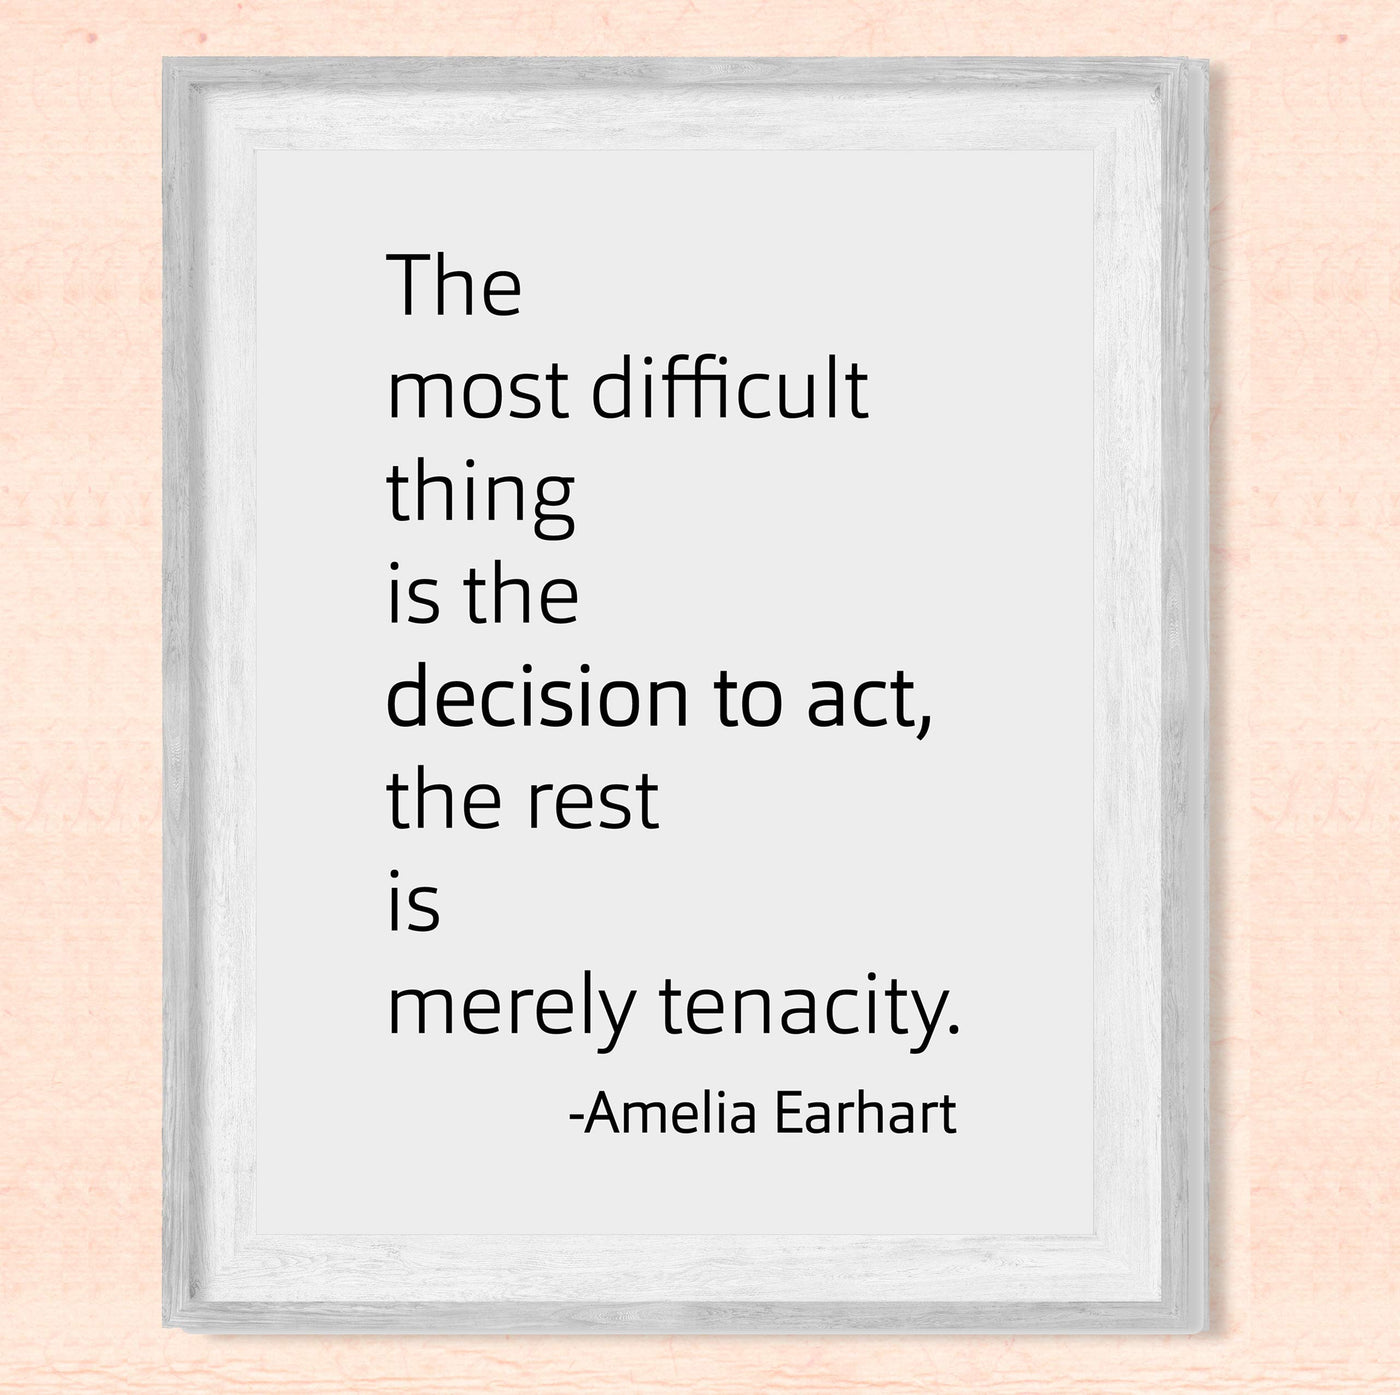 Amelia Earhart Quotes-"The Most Difficult Thing Is the Decision to Act"-8x10" Typographic Wall Print-Ready to Frame. Motivational Home-Office-Classroom-Library Decor. Great Gift for Aviation Fans!